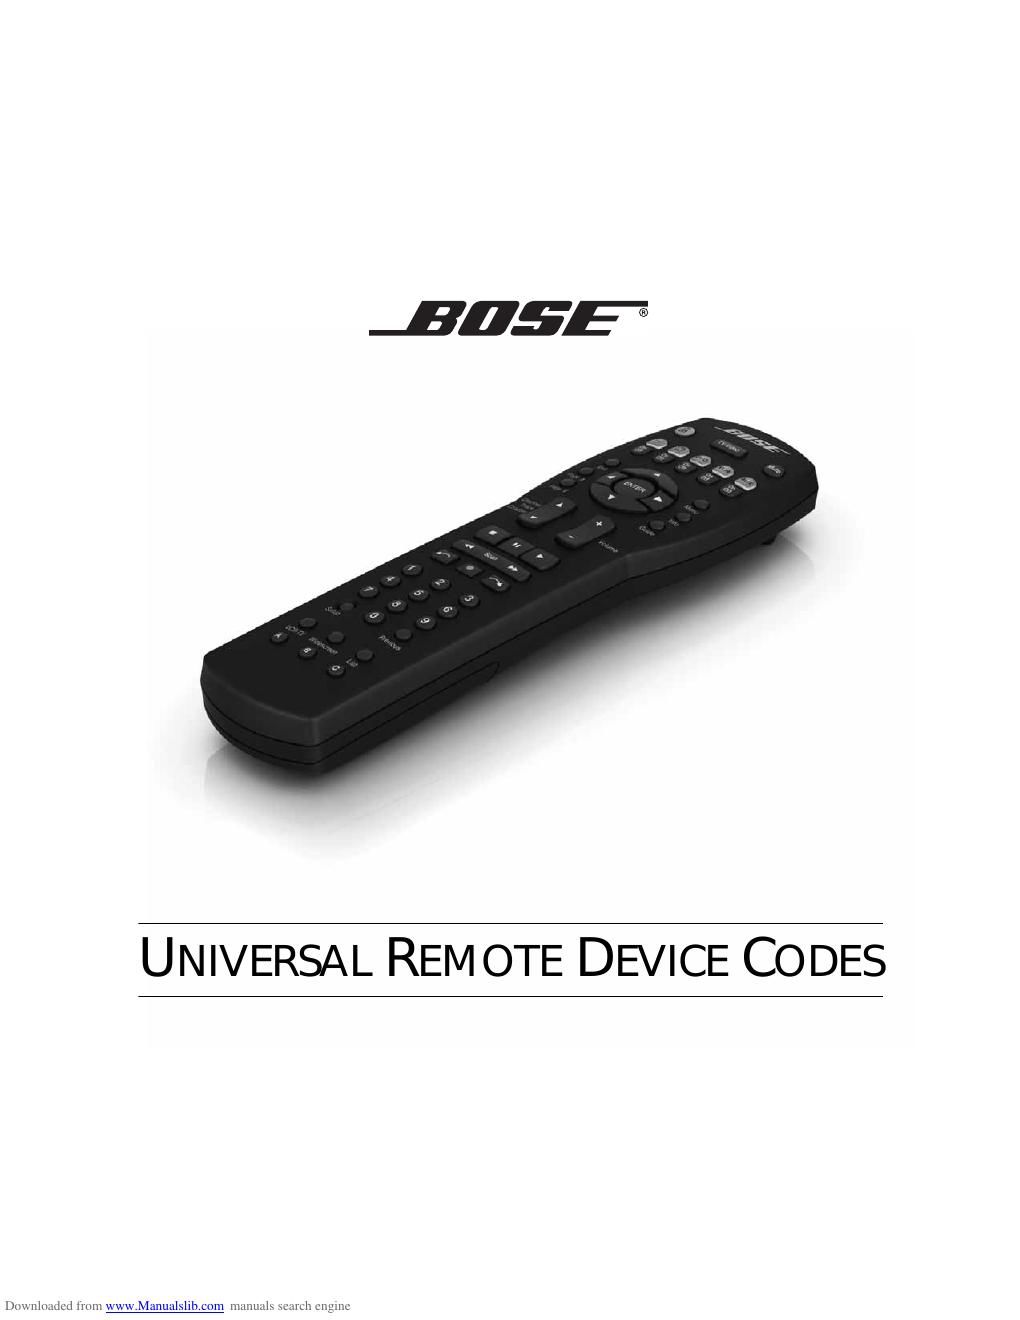 Free Audio Service Manuals Free download bose gs series ii universal remote codes